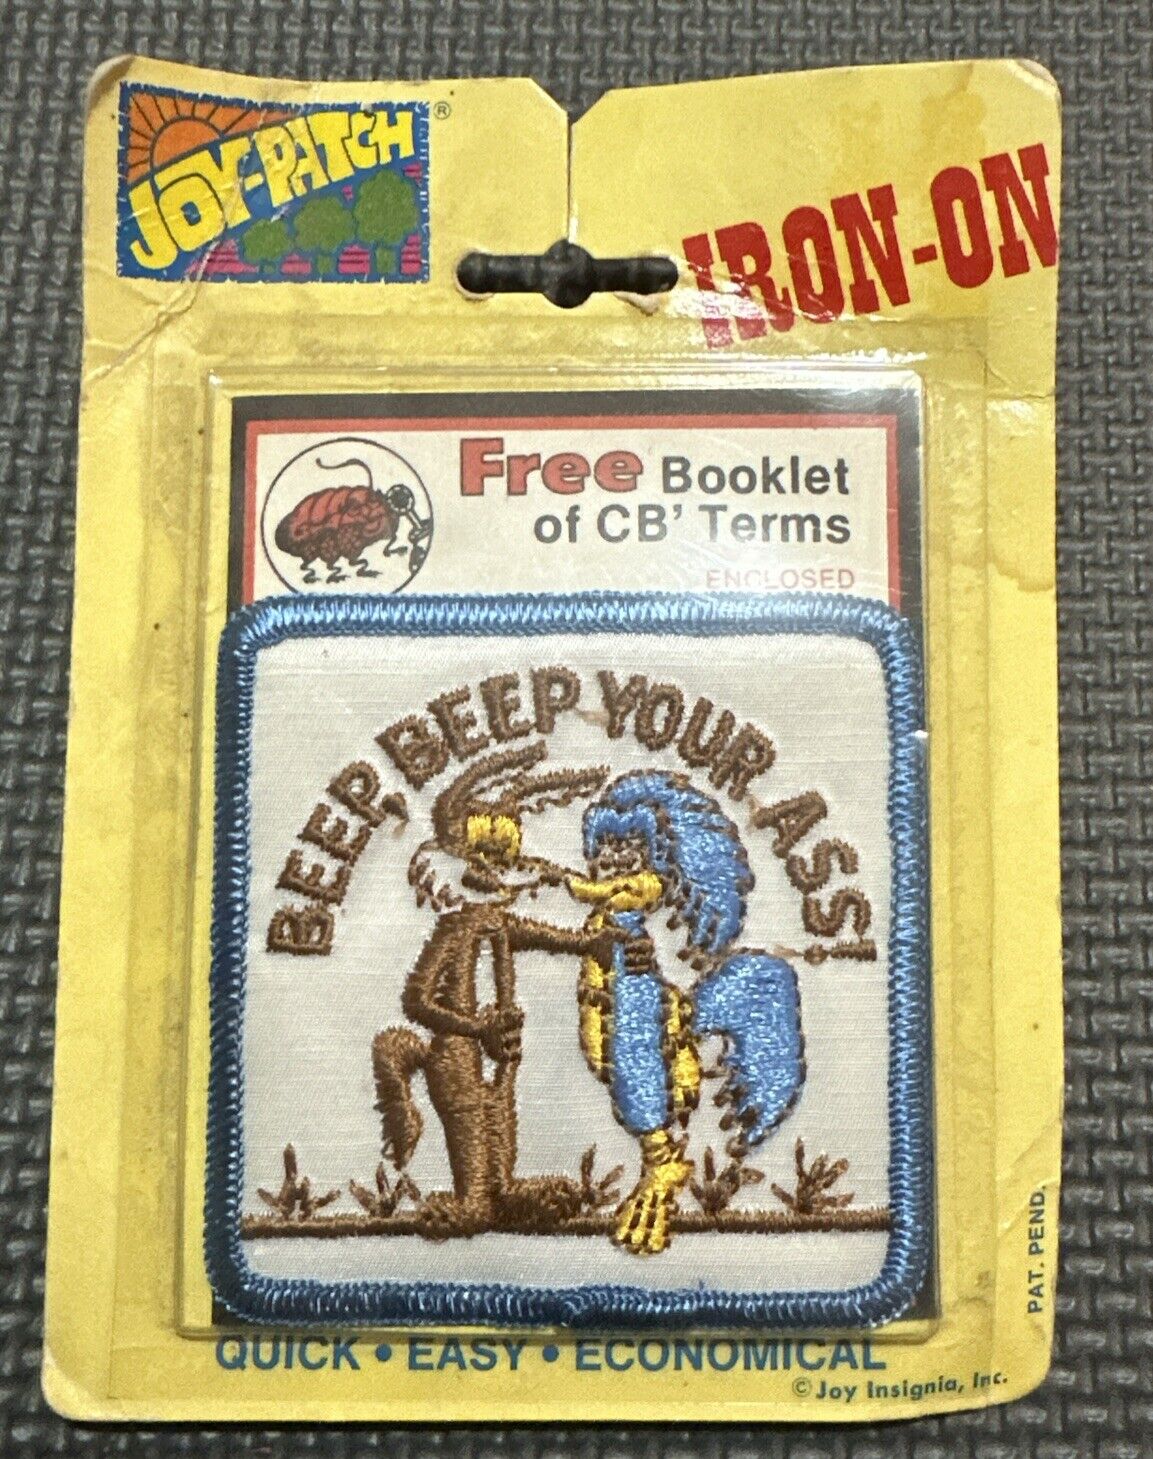 EXTREMELY RARE Vintage 70s Road Runner & Coyote 3”x3” Patch “Beep Beep Your Ass”